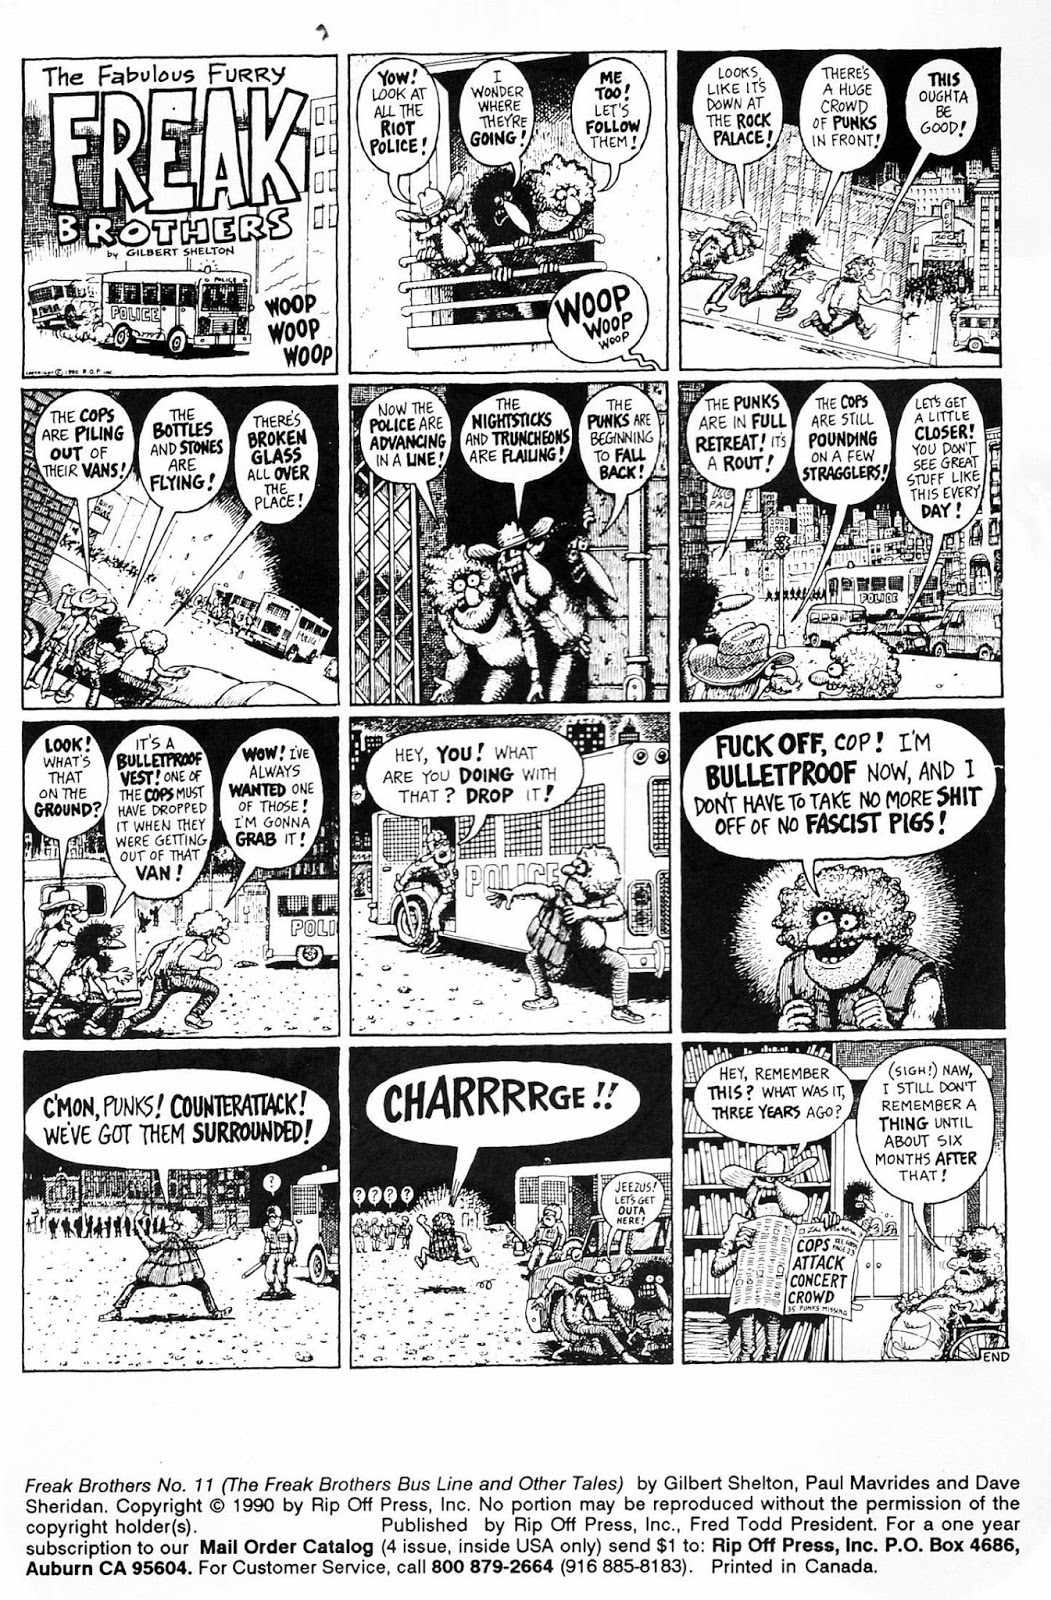 TALES FROM THE KRYPTONIAN: Underground comix icon Gilbert Shelton